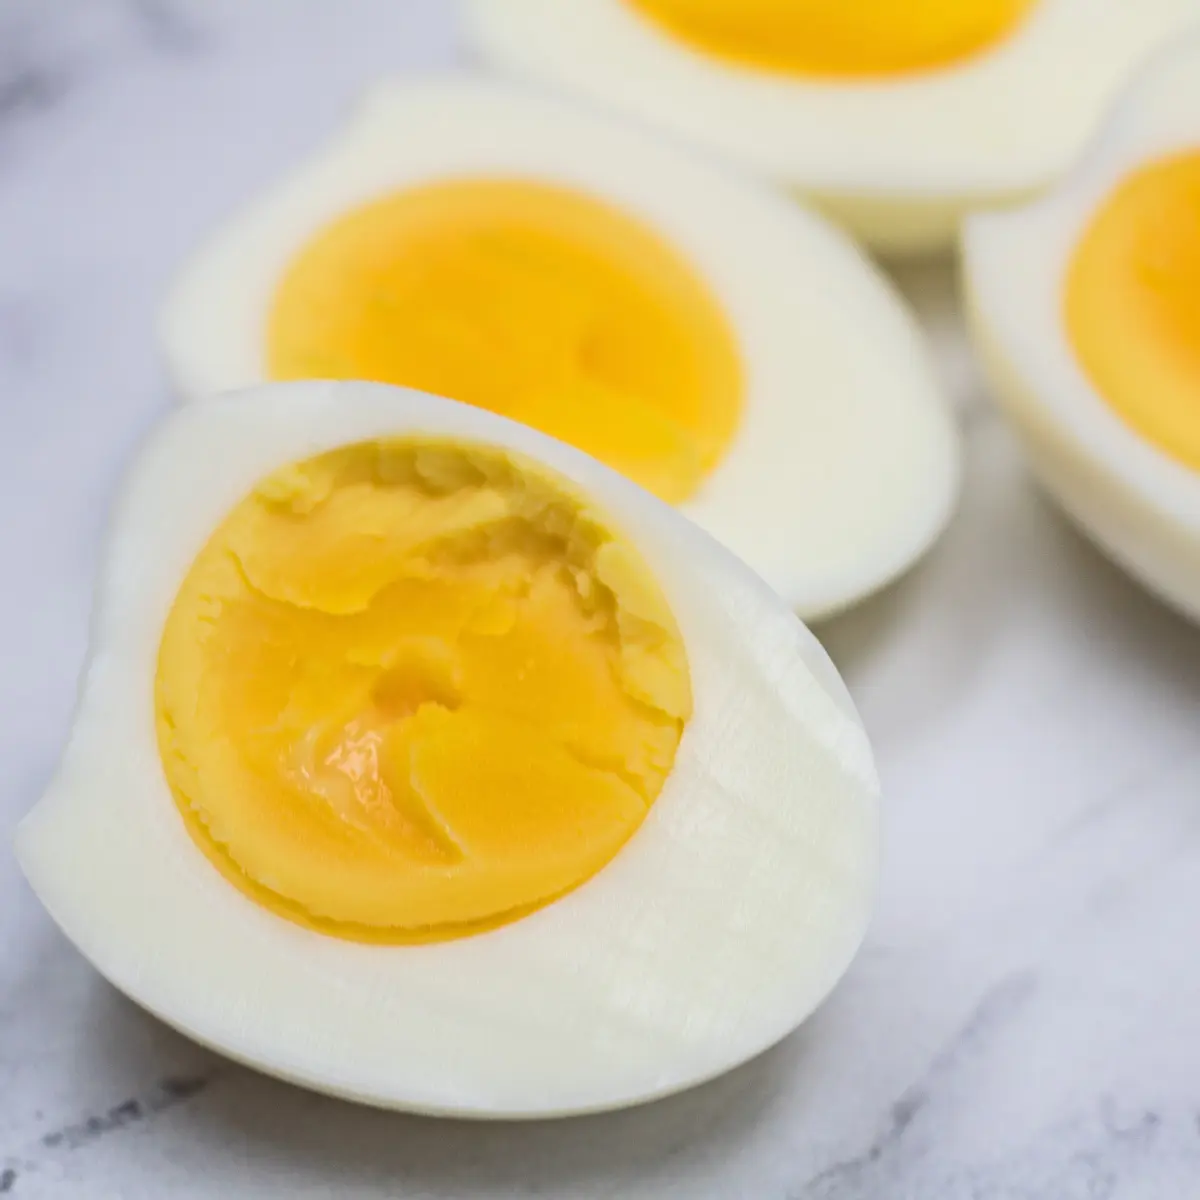 Instant-pot-hard-boiled-eggs-after-cooling-and-slicing-in-half.